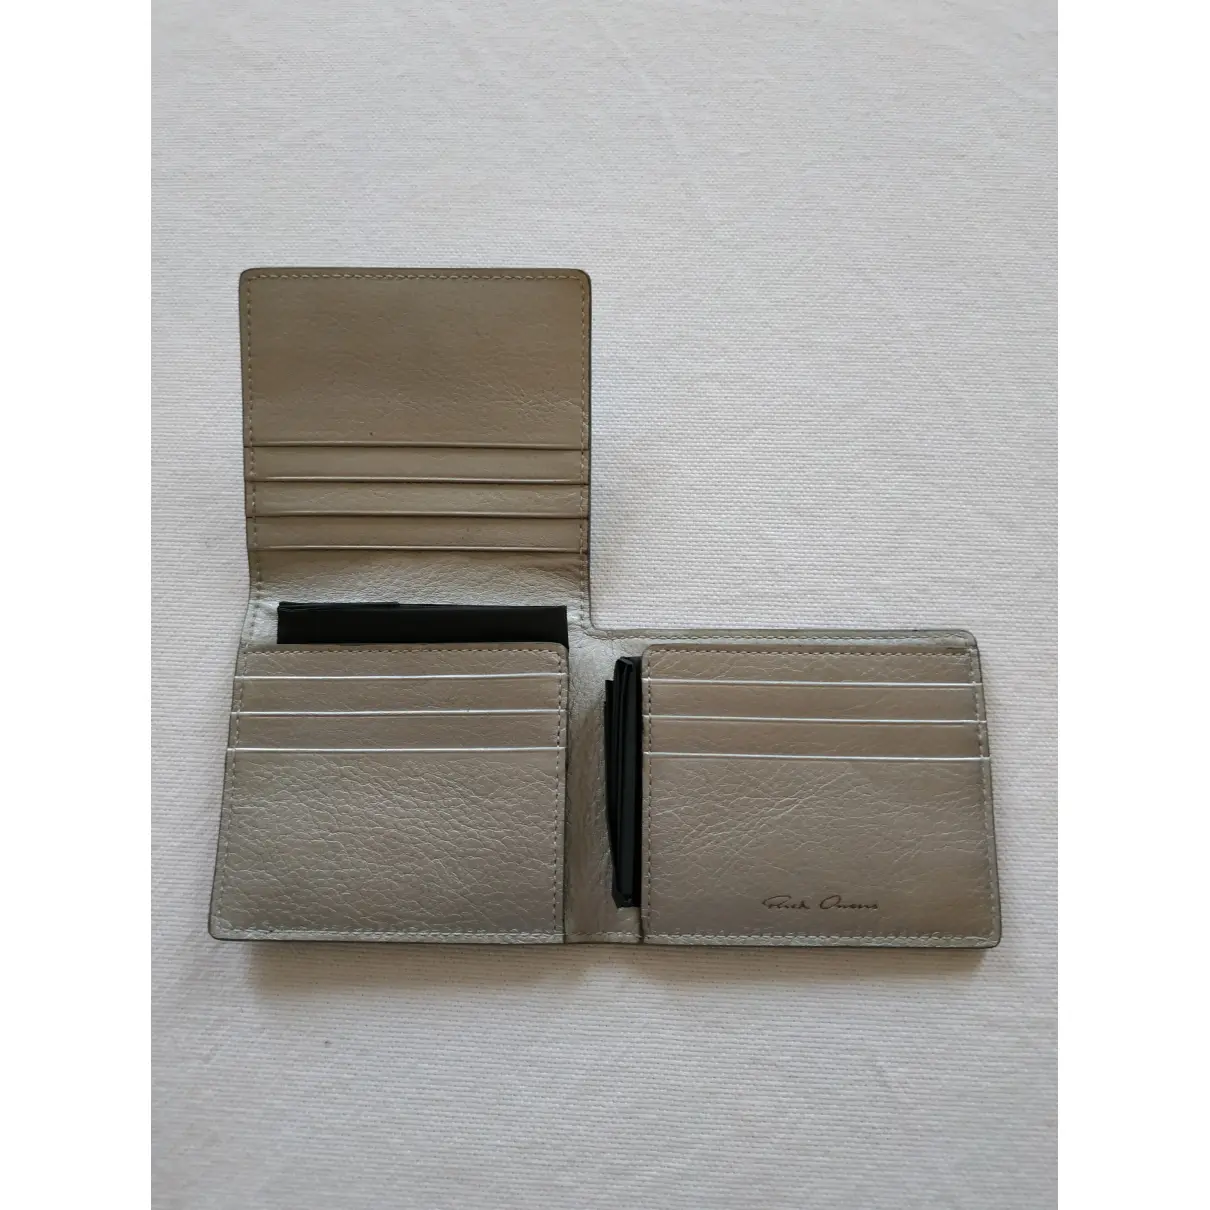 Buy Rick Owens Leather card wallet online